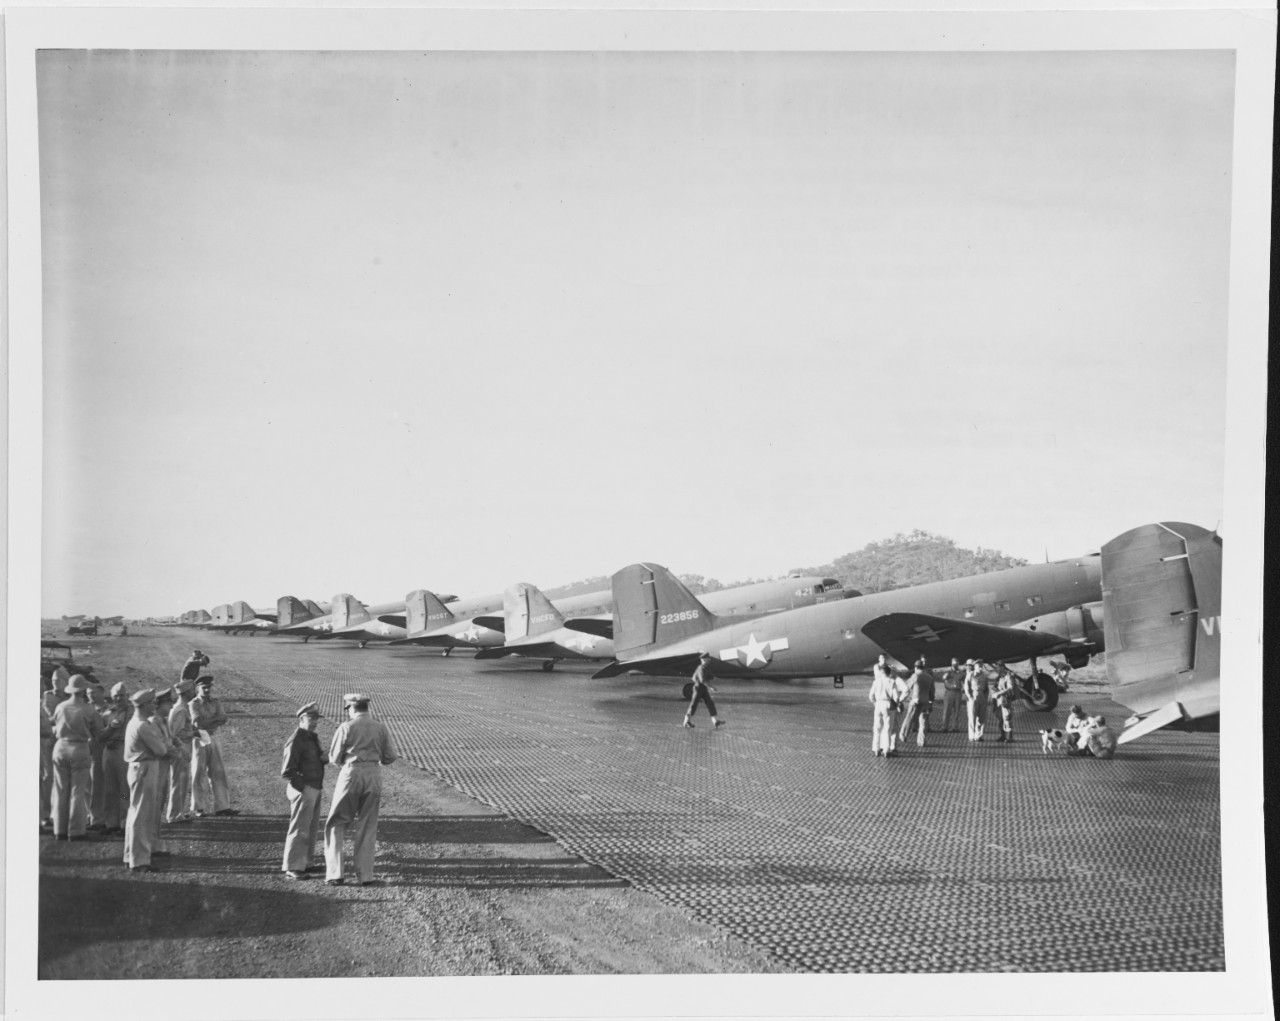 C-47 Transport planes at New Guinea loaded with paratroopers. General Douglas Macarthur and Lieutenant General George Keaney, US Army, Commanding General, Fifth Air Force, September 1943.